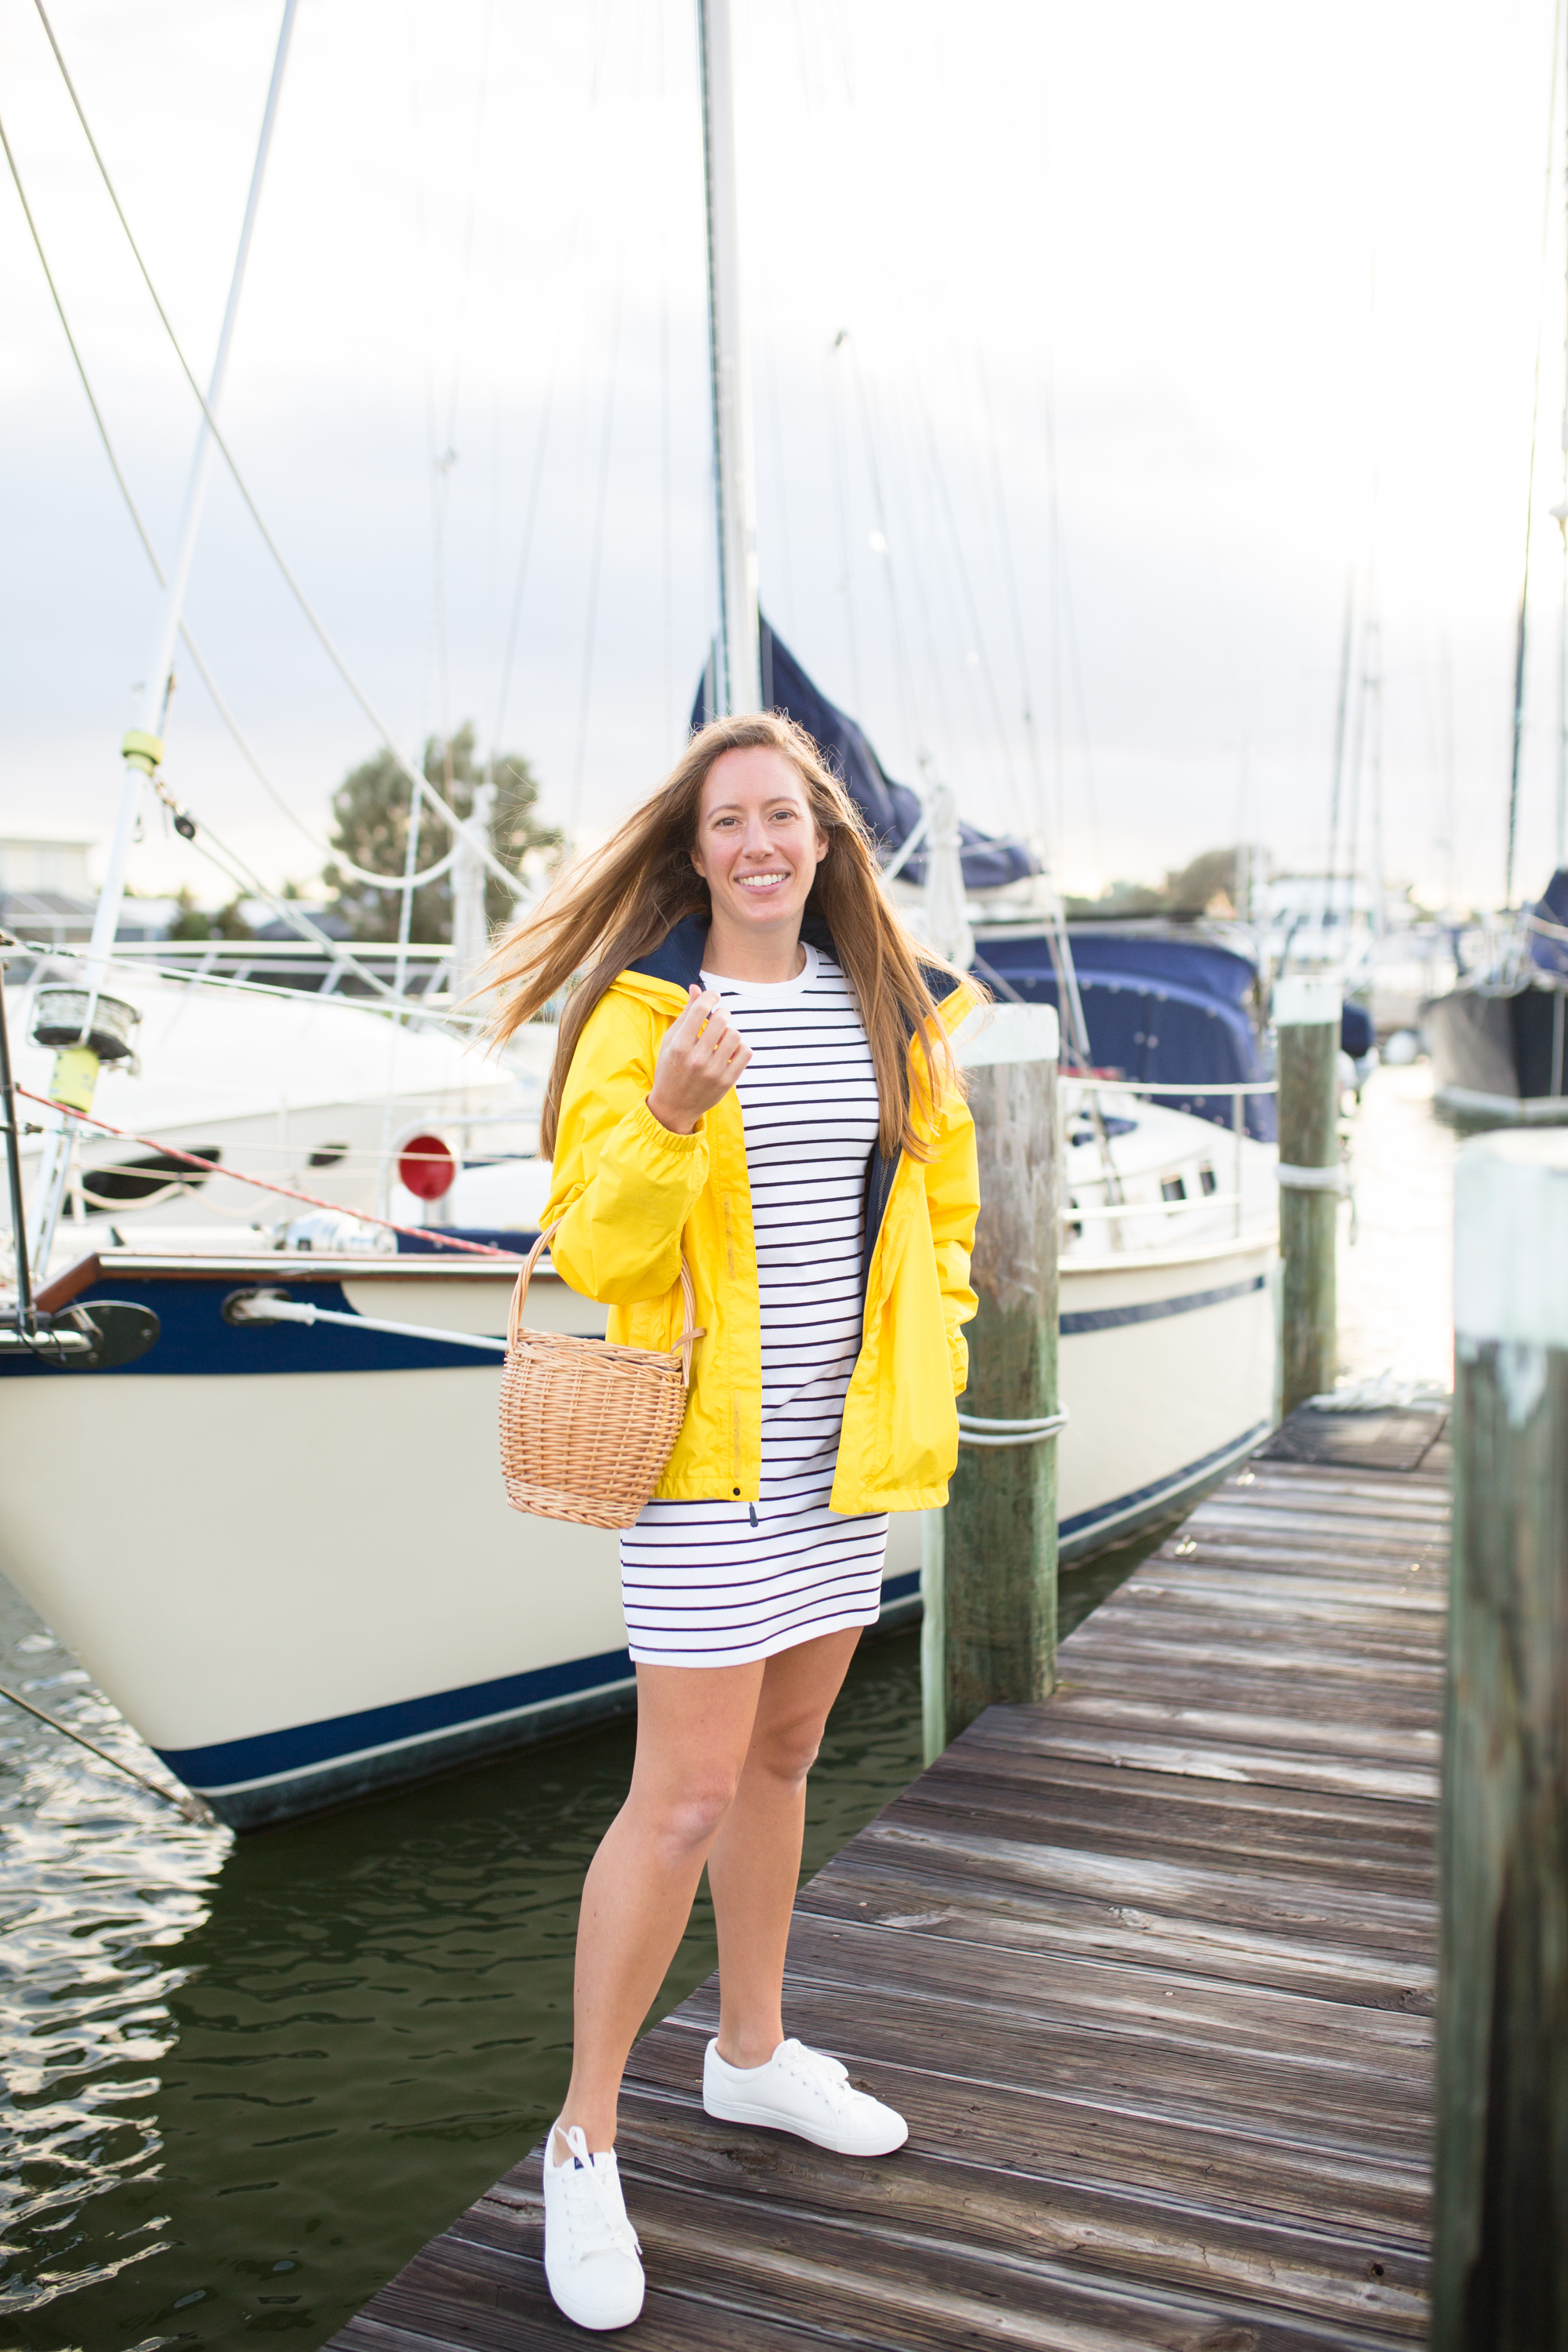 How to Style a Long Sleeve Striped Dress / Striped Dress Outfit / Blue Stripes / Yellow Raincoat / White Sneakers / Preppy Outfit / Coastal Outfit / Preppy Style Outfit / Cute Preppy Outfits / Nautical Outfit Women - Sunshine Style, A Florida Fashion and Lifestyle Blog